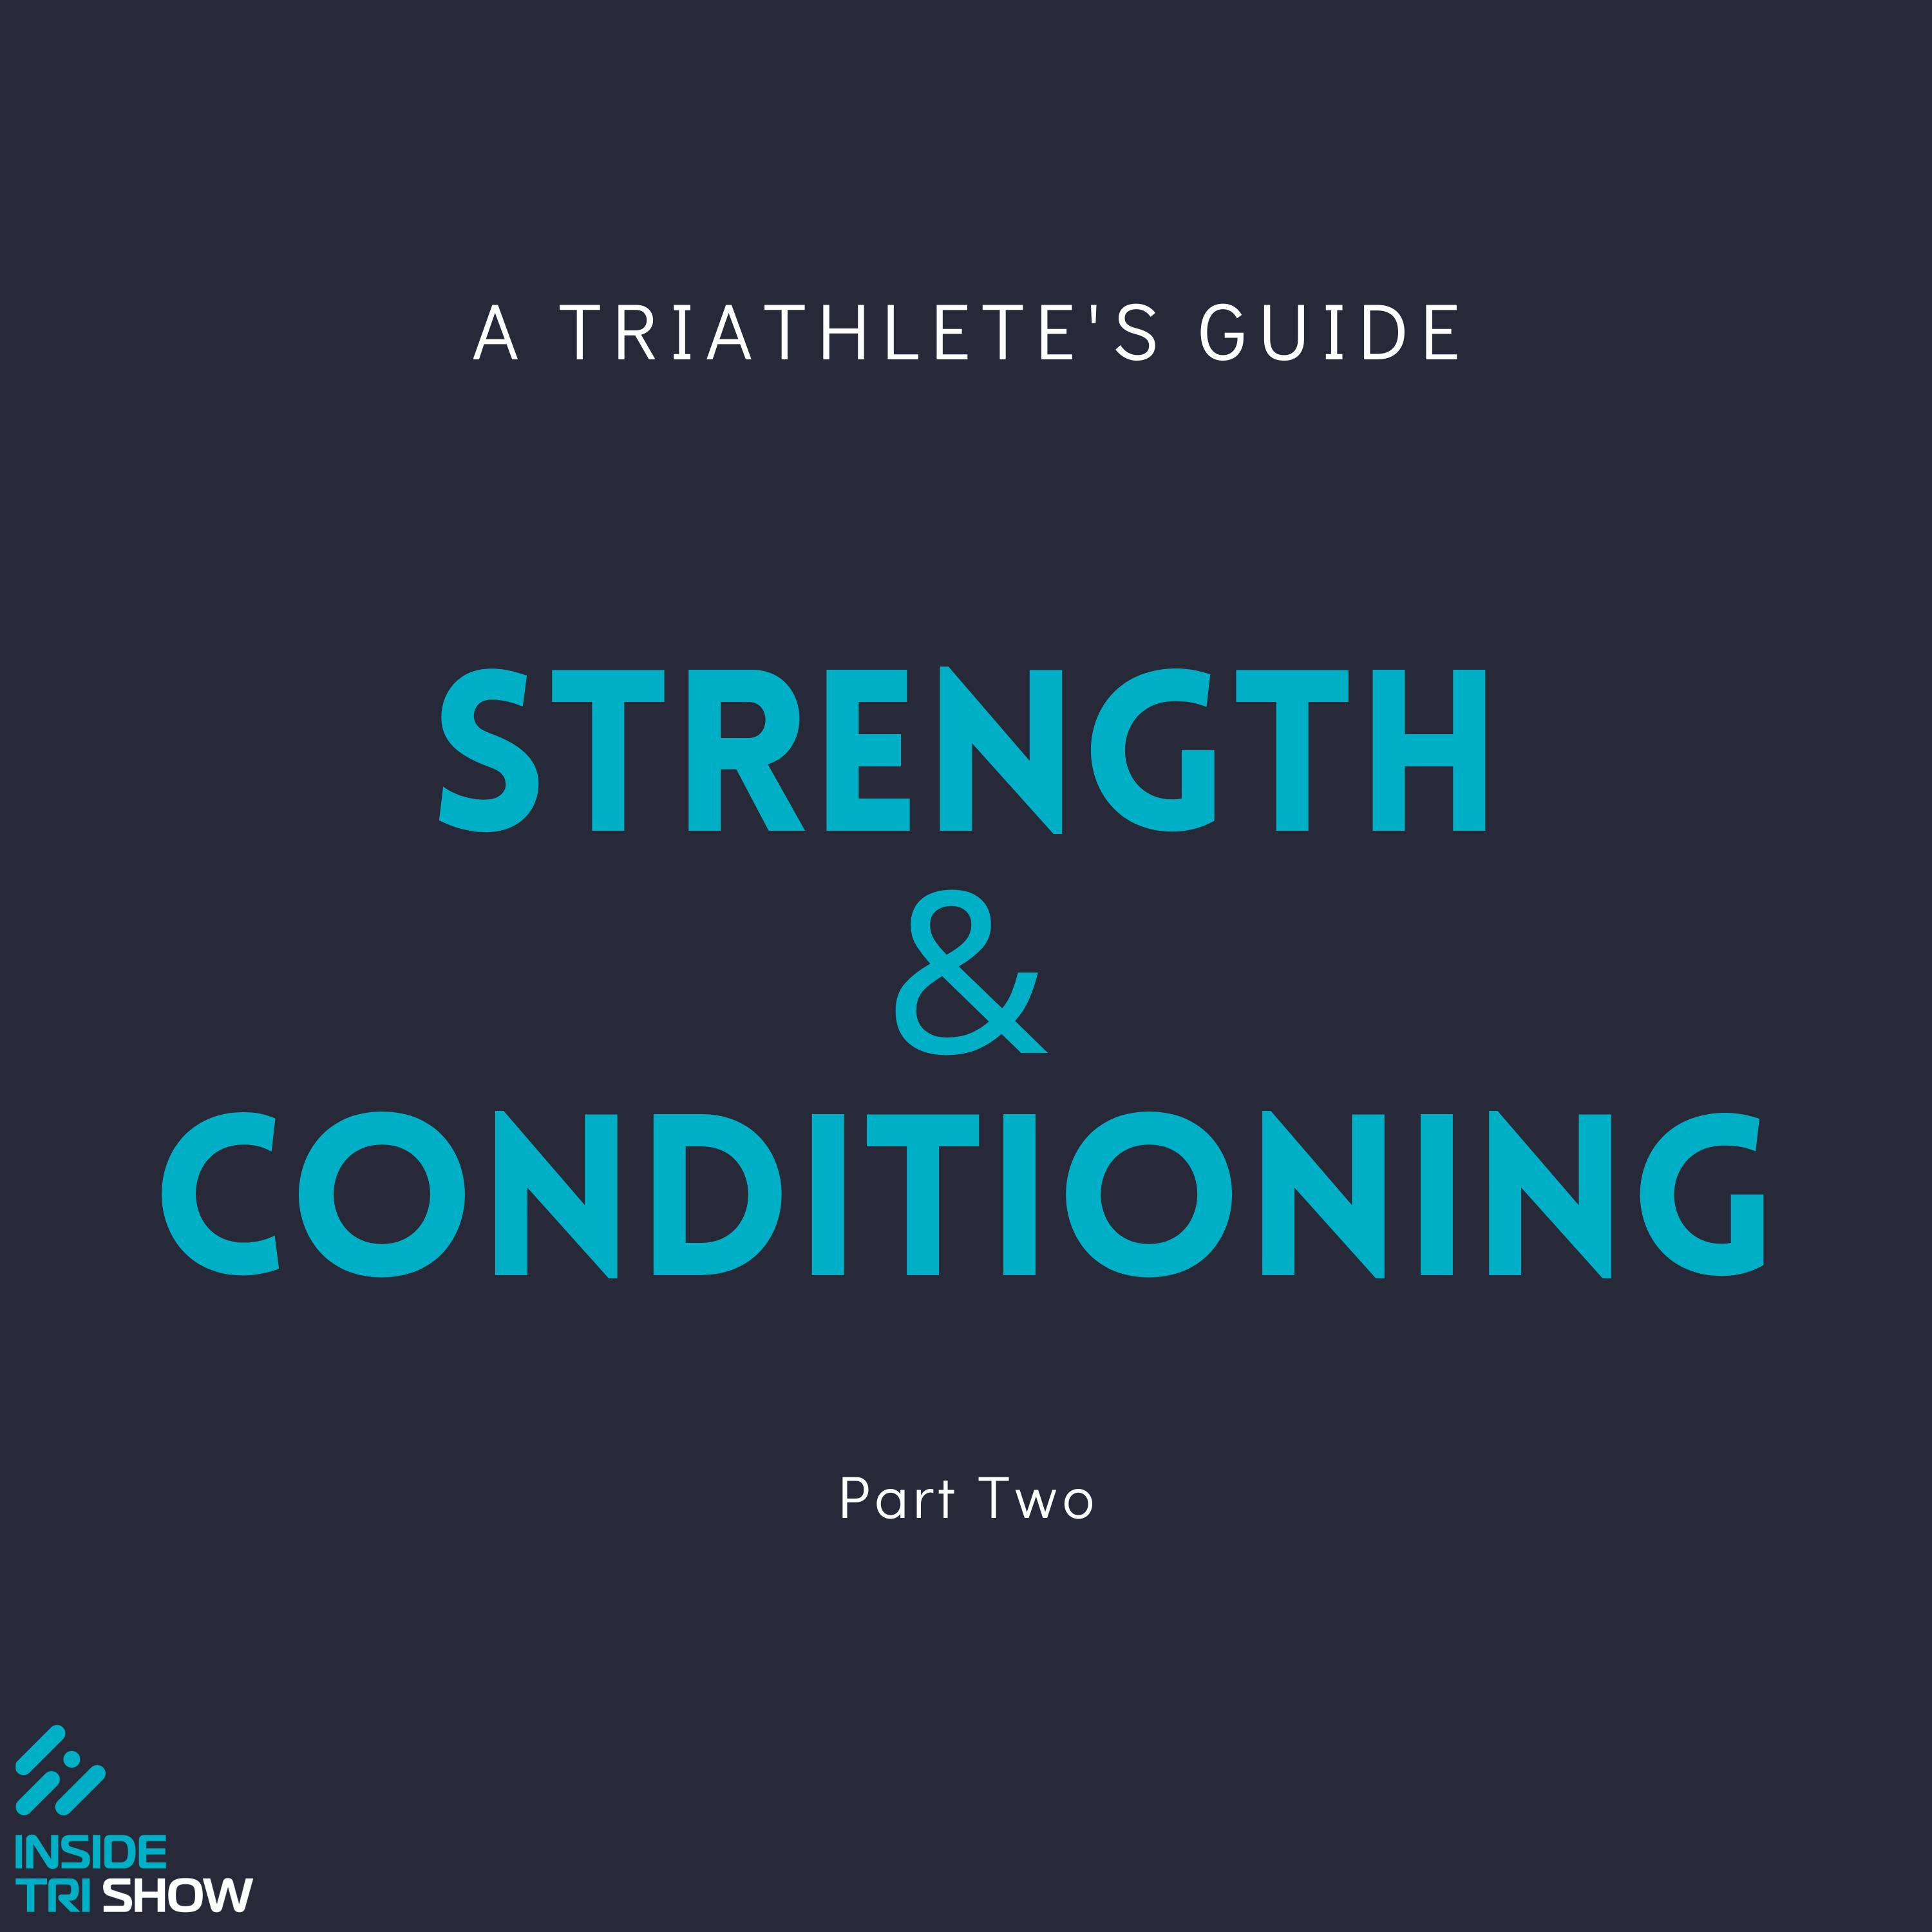 A triathlete's guide to Strength and Conditioning: Part 2